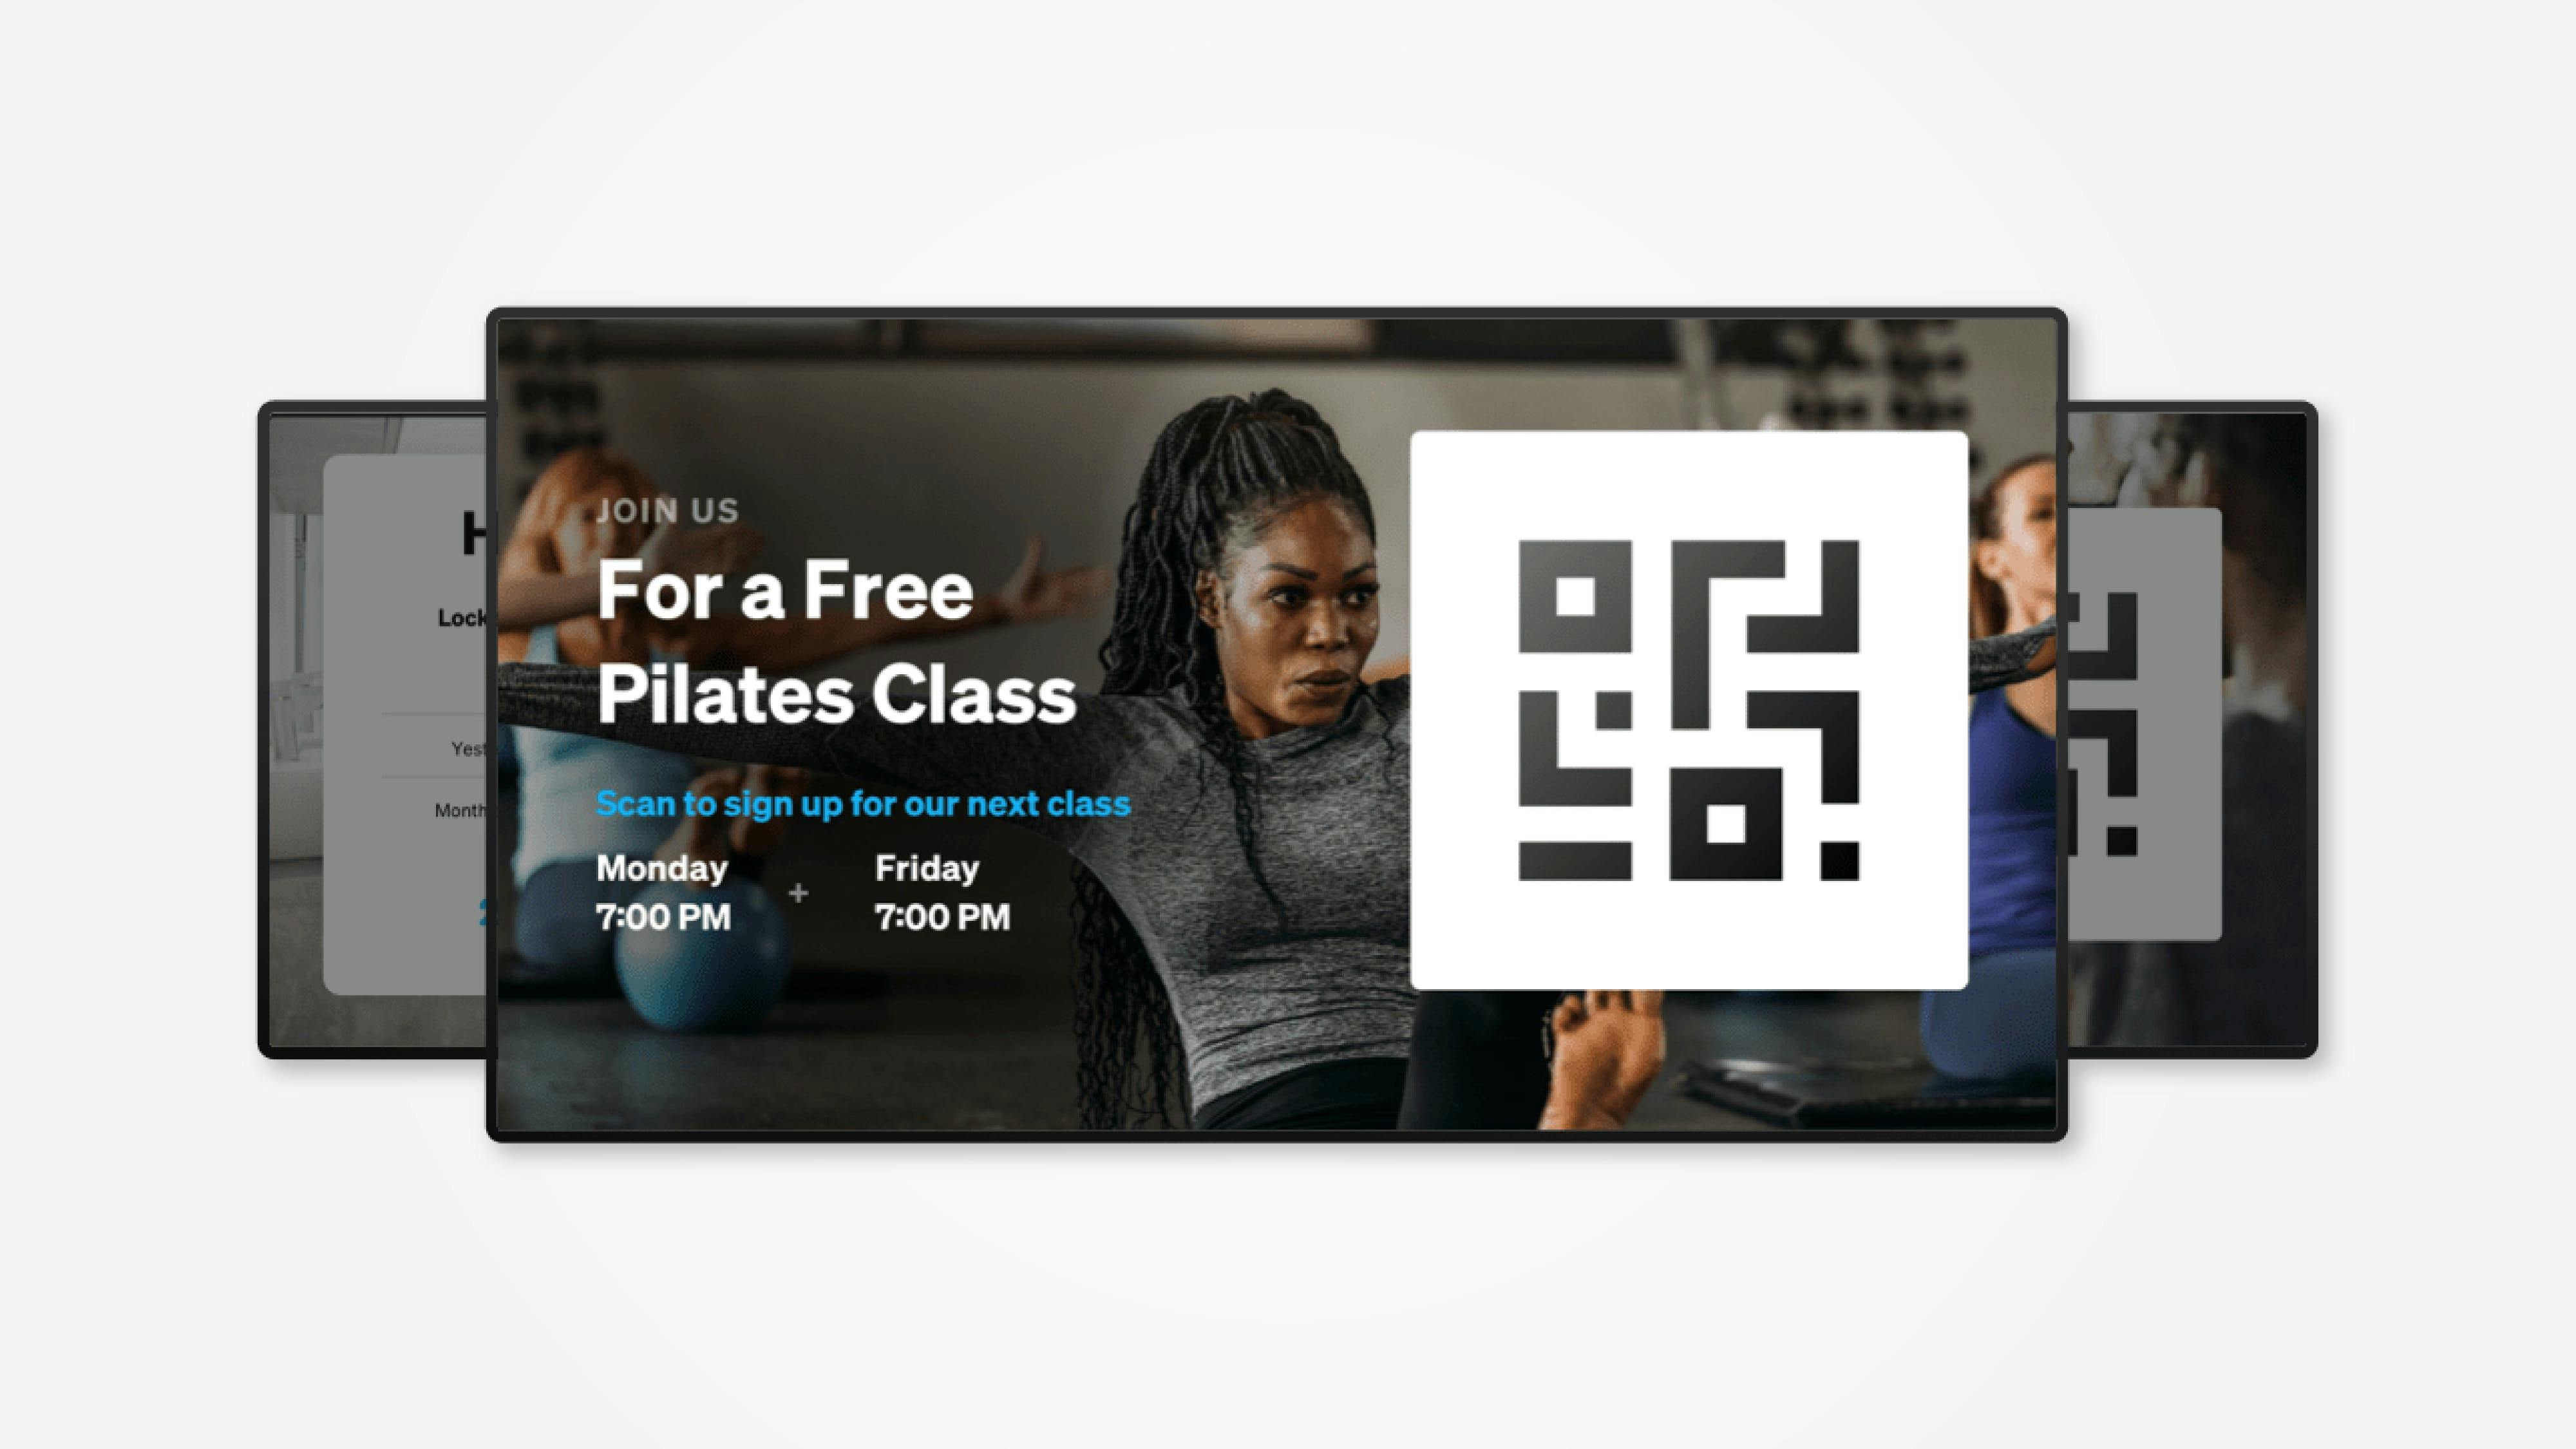 The UPshow platform promoting a free pilates class, with a QR code.